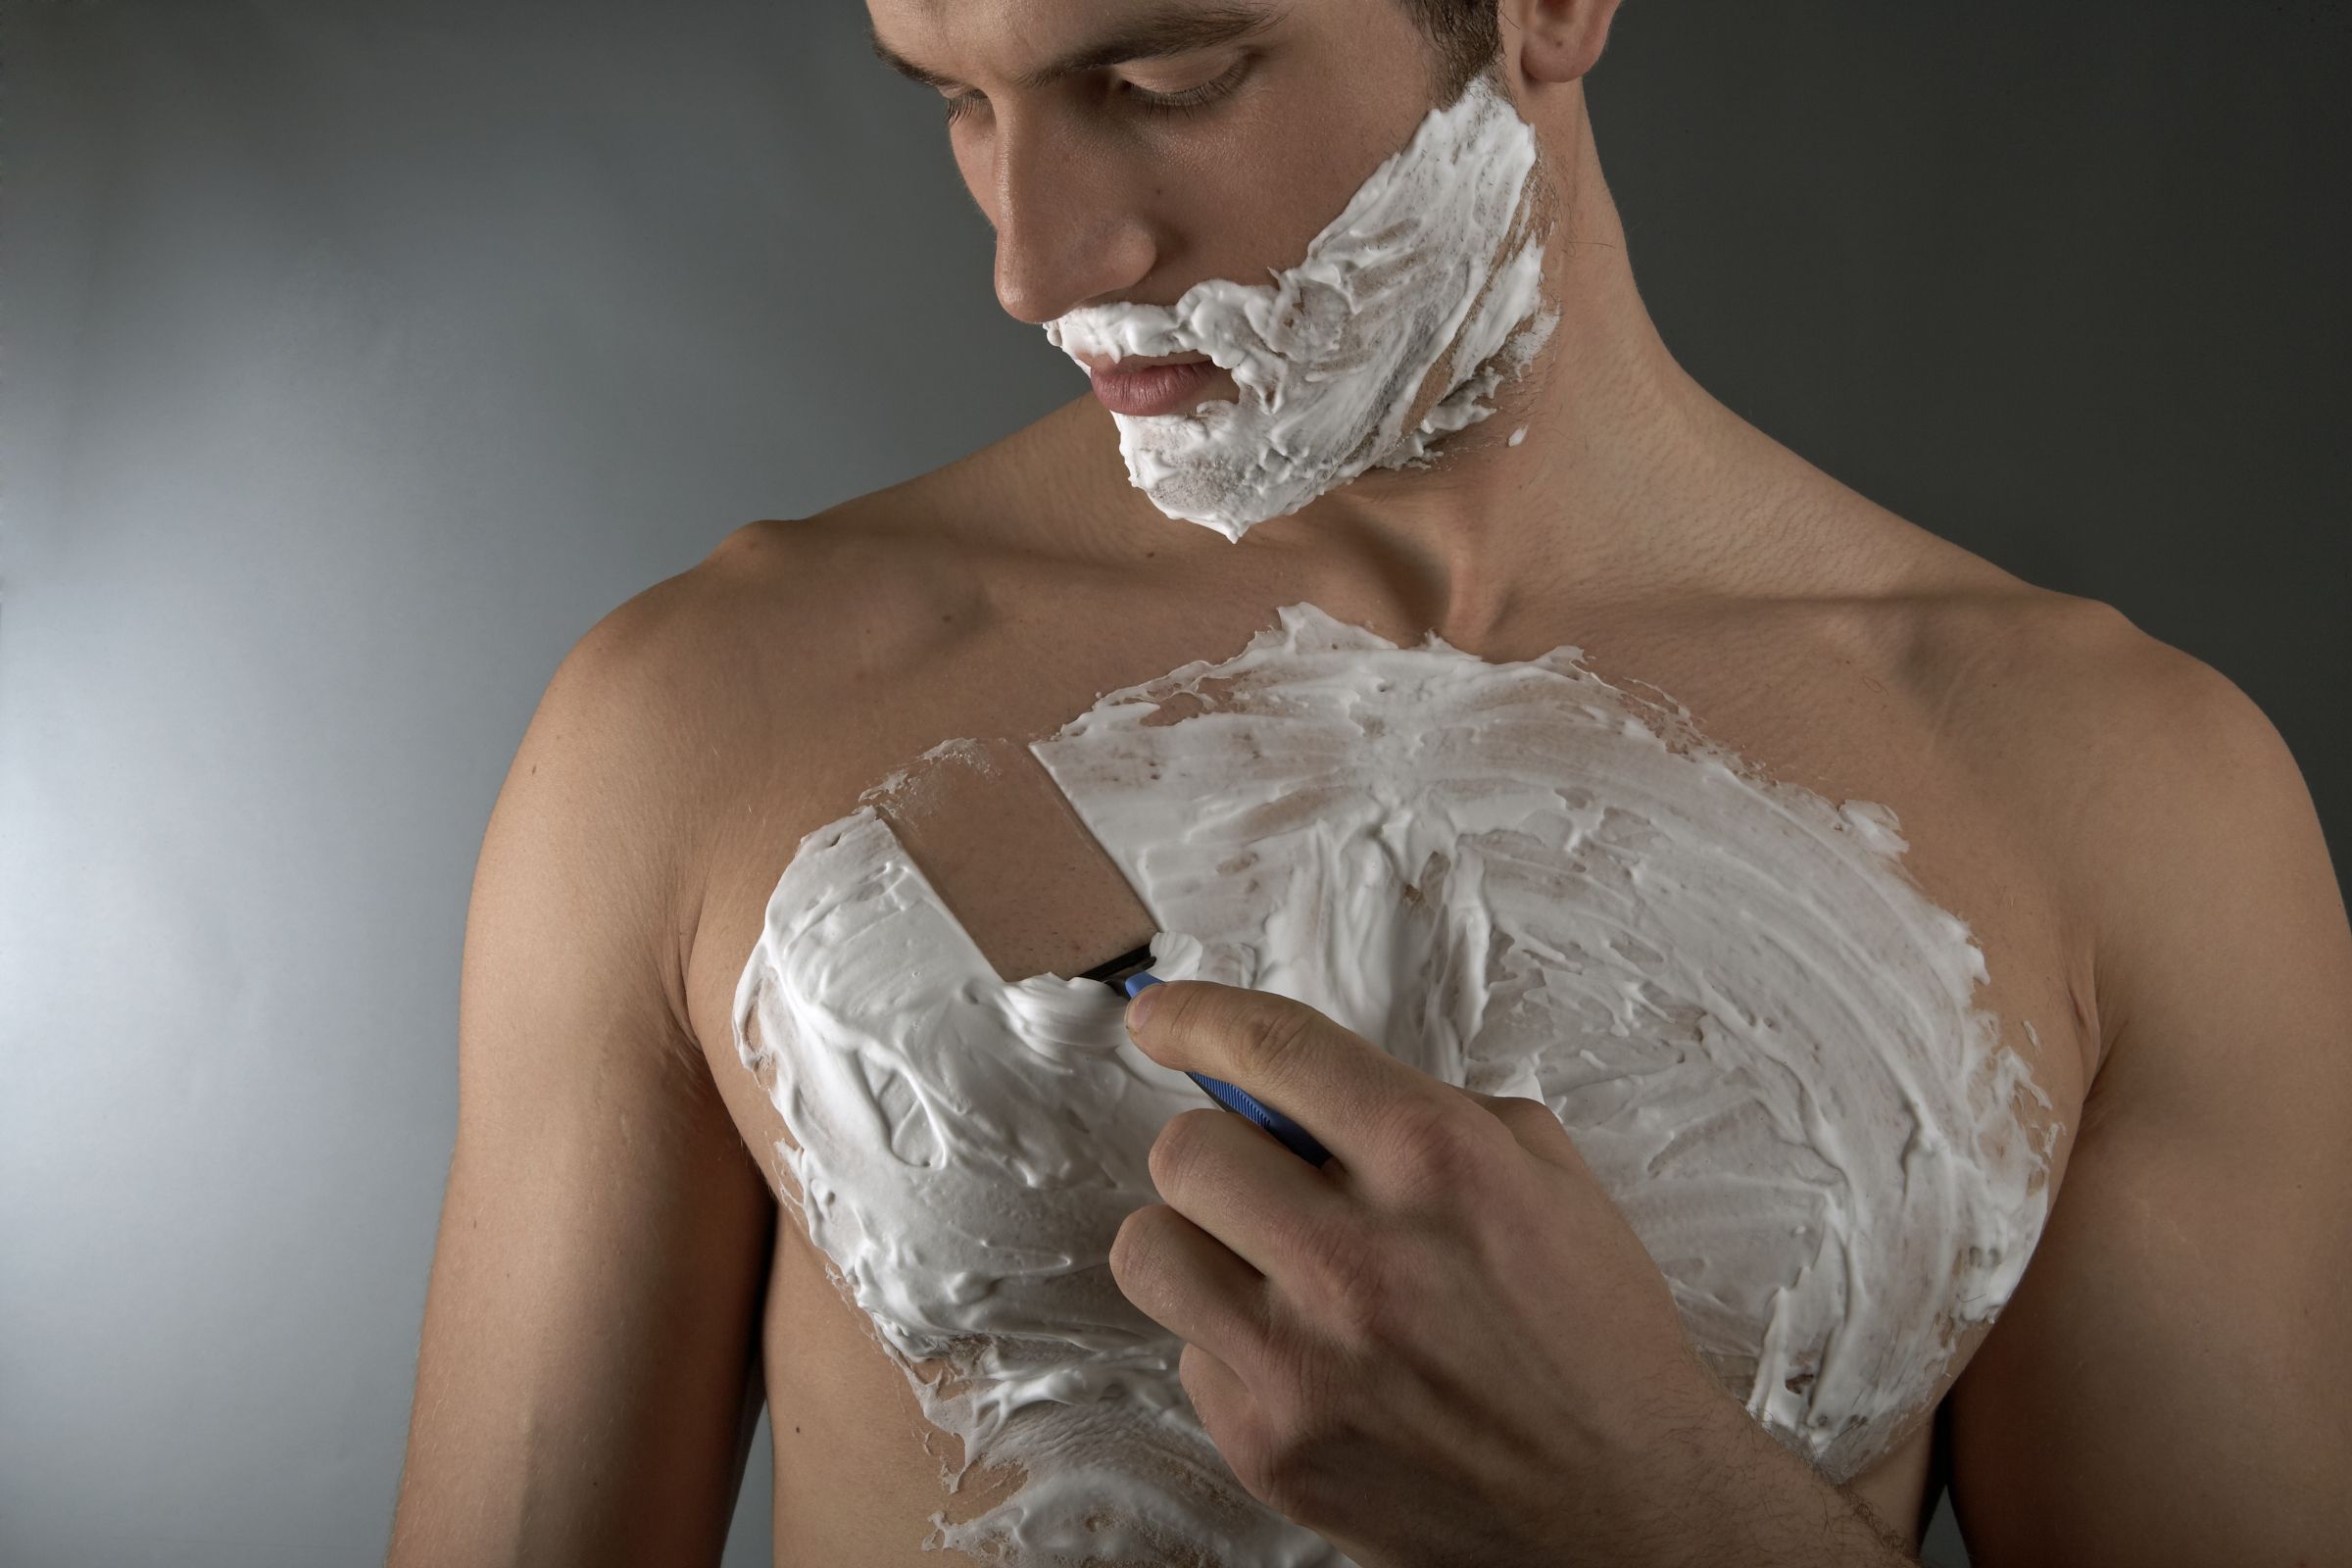 How To Shave Your Chest Hair Without Bumps Or Irritation